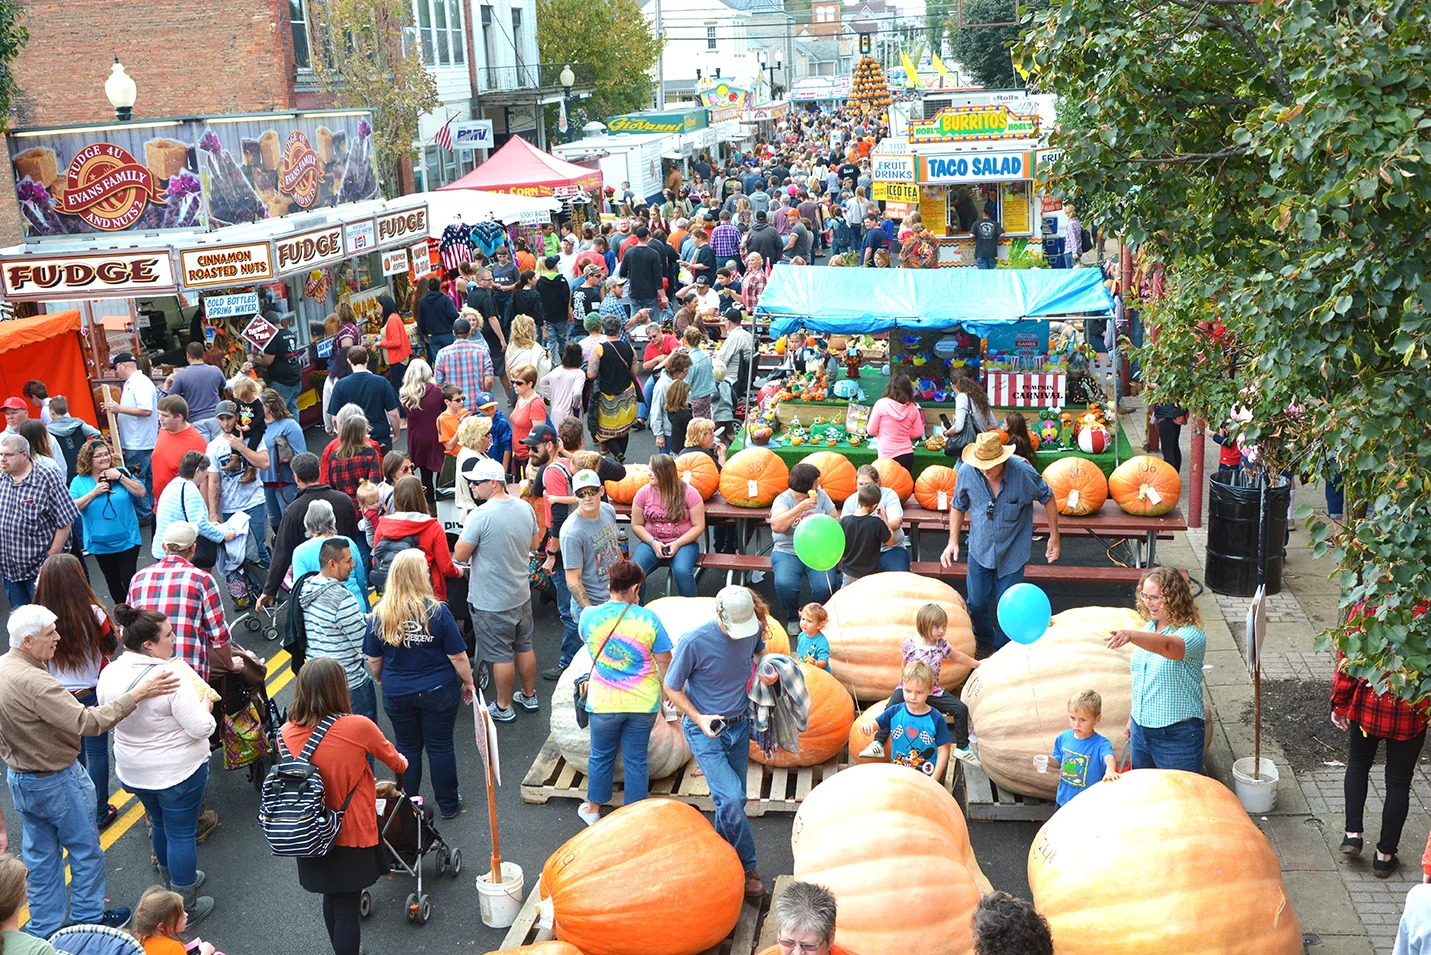 Crowds enjoying The Barnesville Pumpkin Festival with some of the giant pumpkins in the foreground.